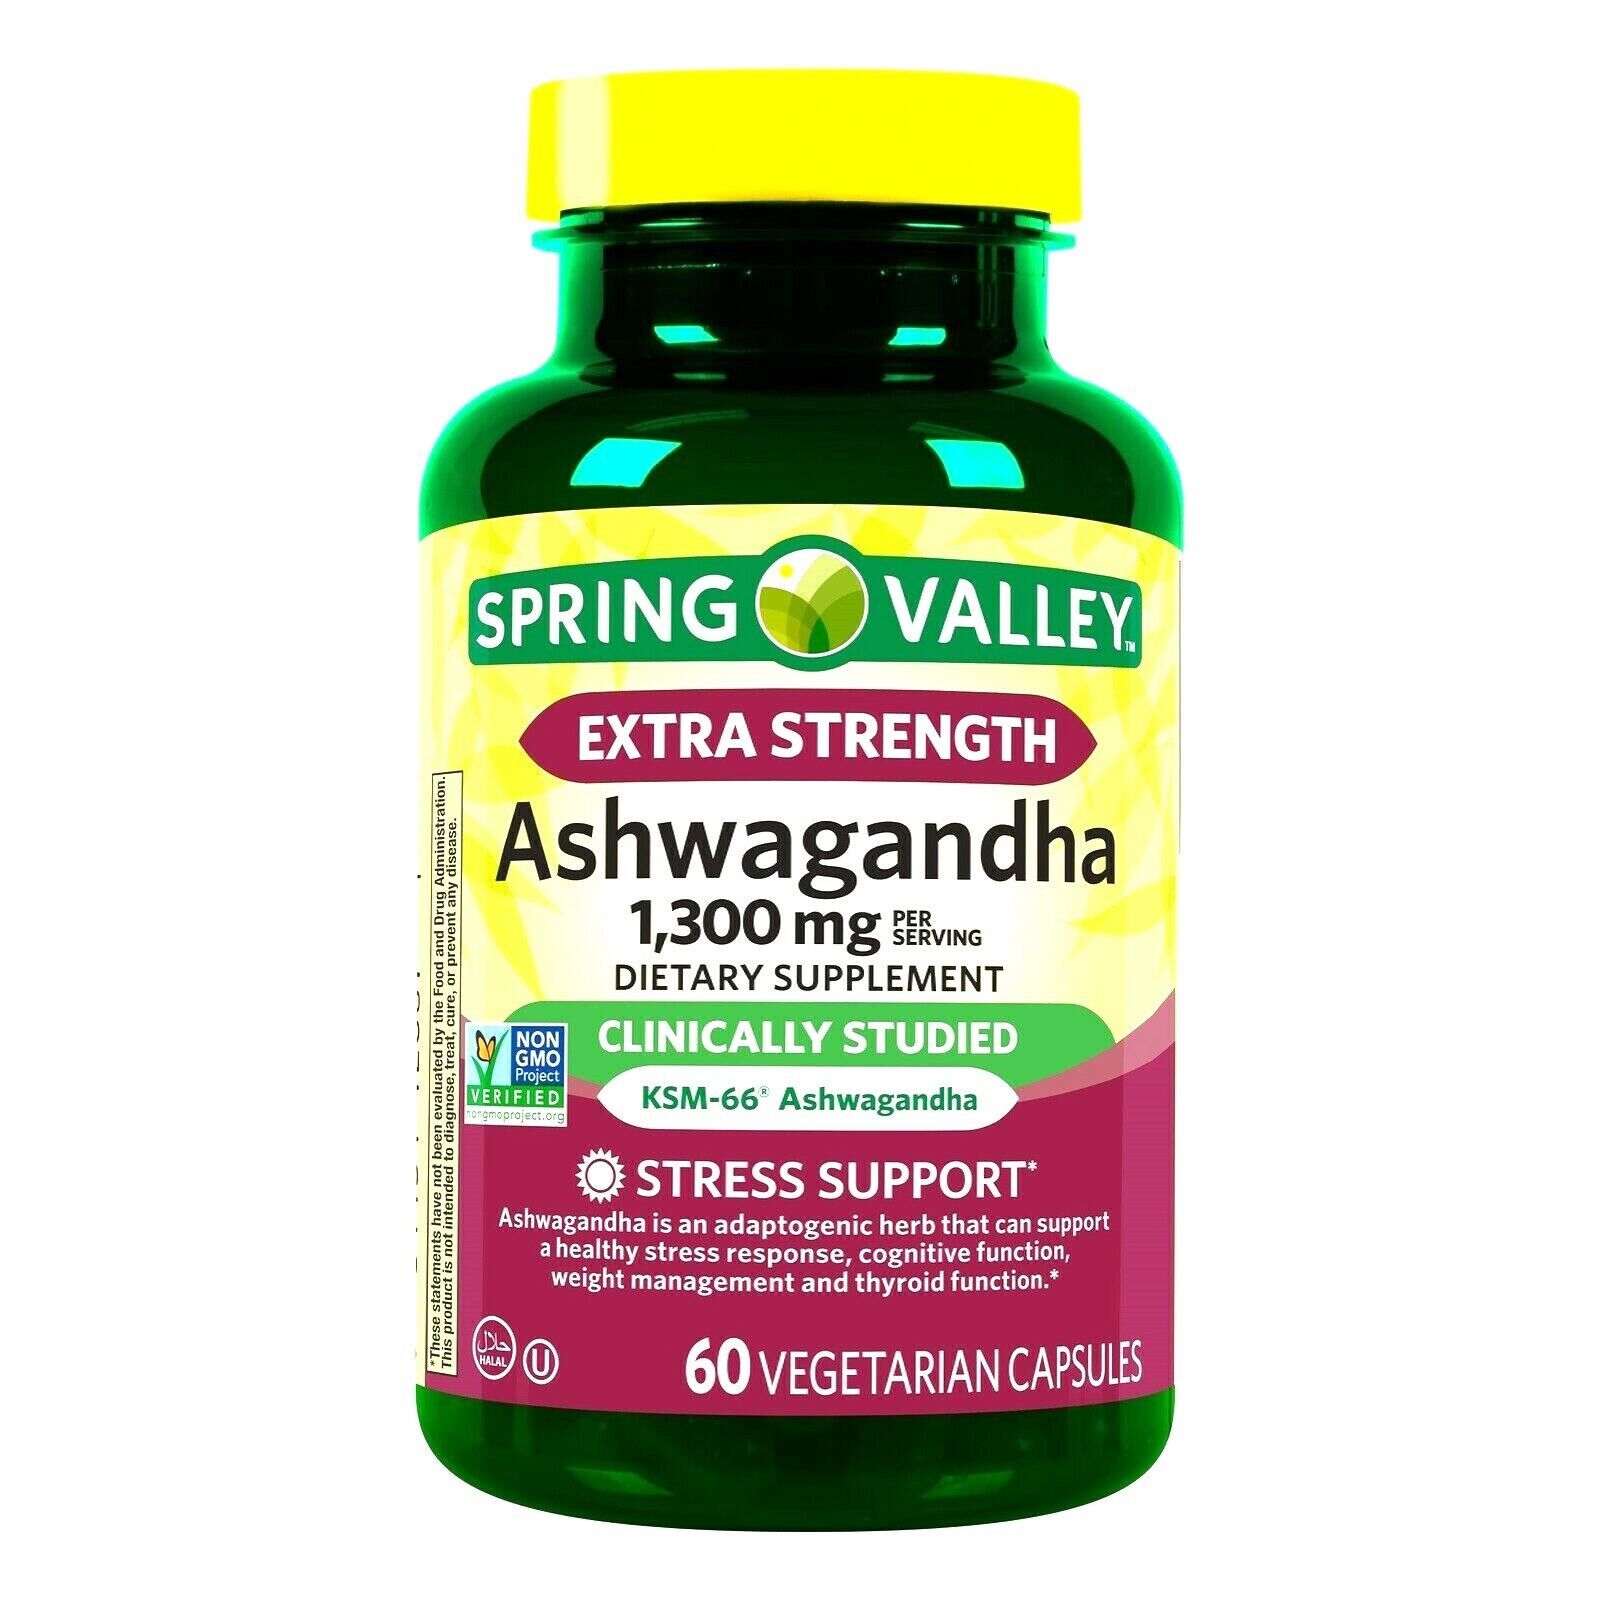 Primary image for Spring Valley Extra Strength Ashwagandha  Vegetarian Capsules, 1300 mg 60 count